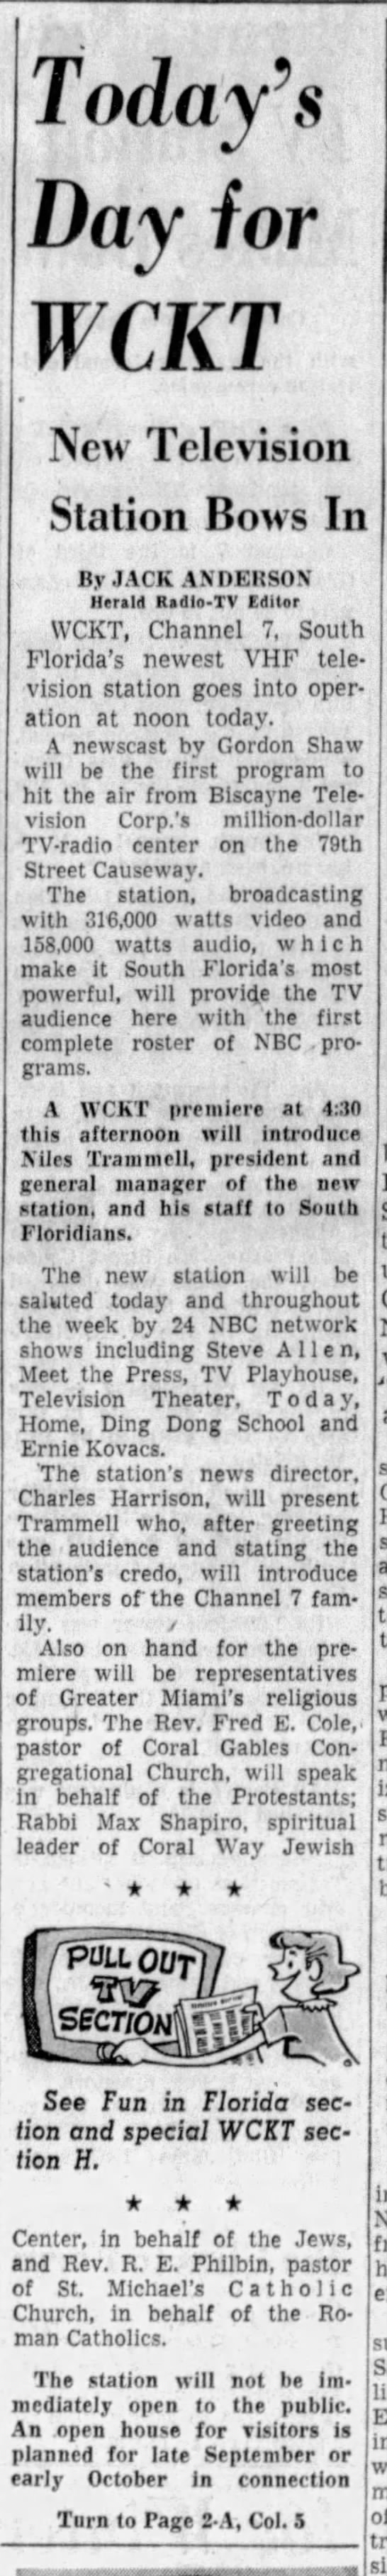 Today's Day for WCKT: New Television Station Bows In - 